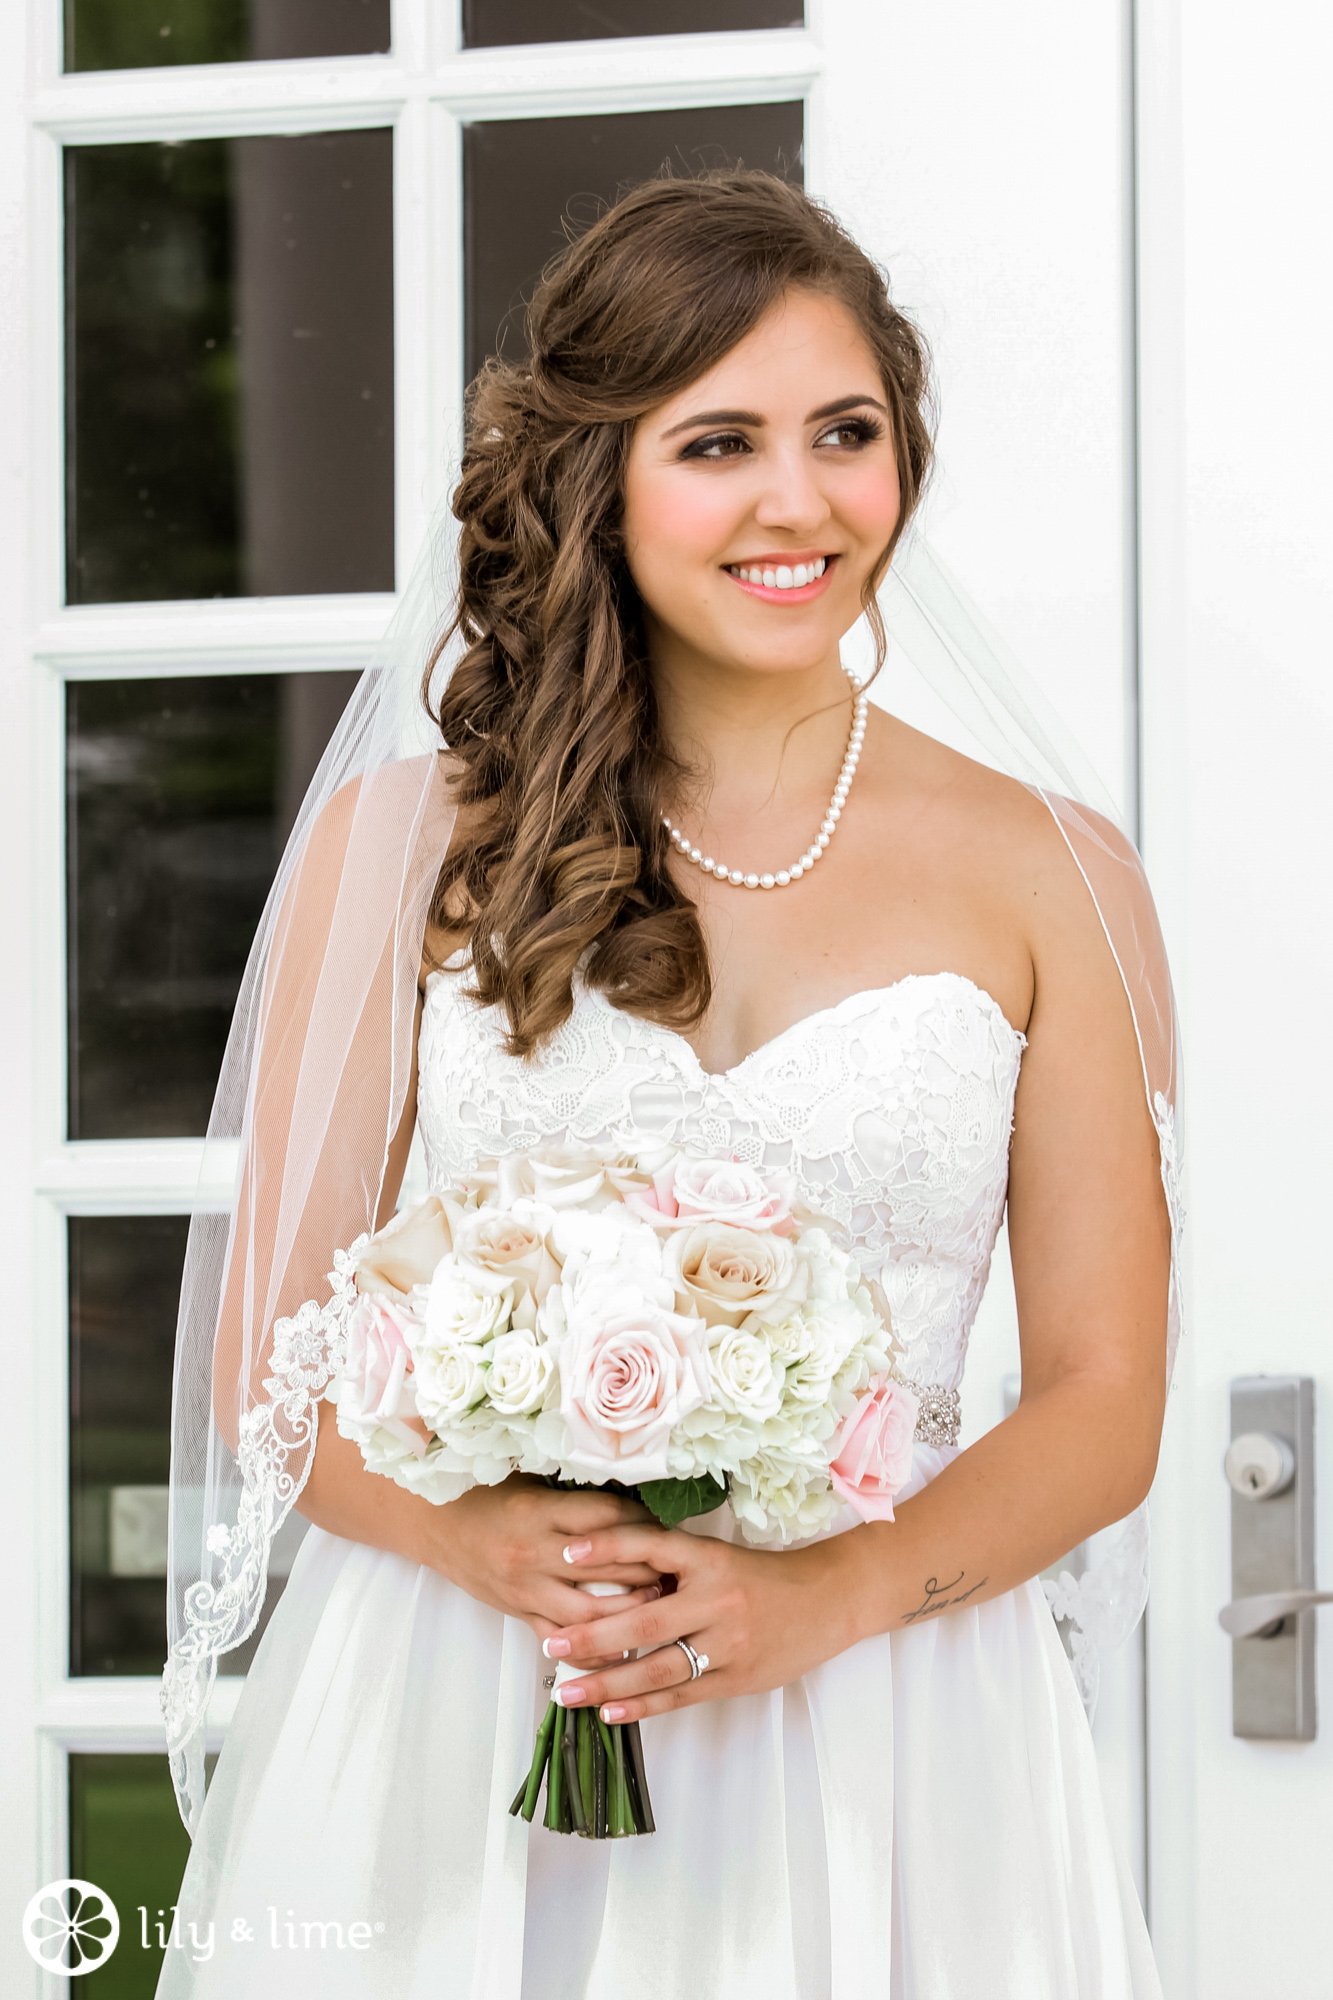 Naturally Curly Wedding Hairstyles for Brides to Be - gadartistry.com